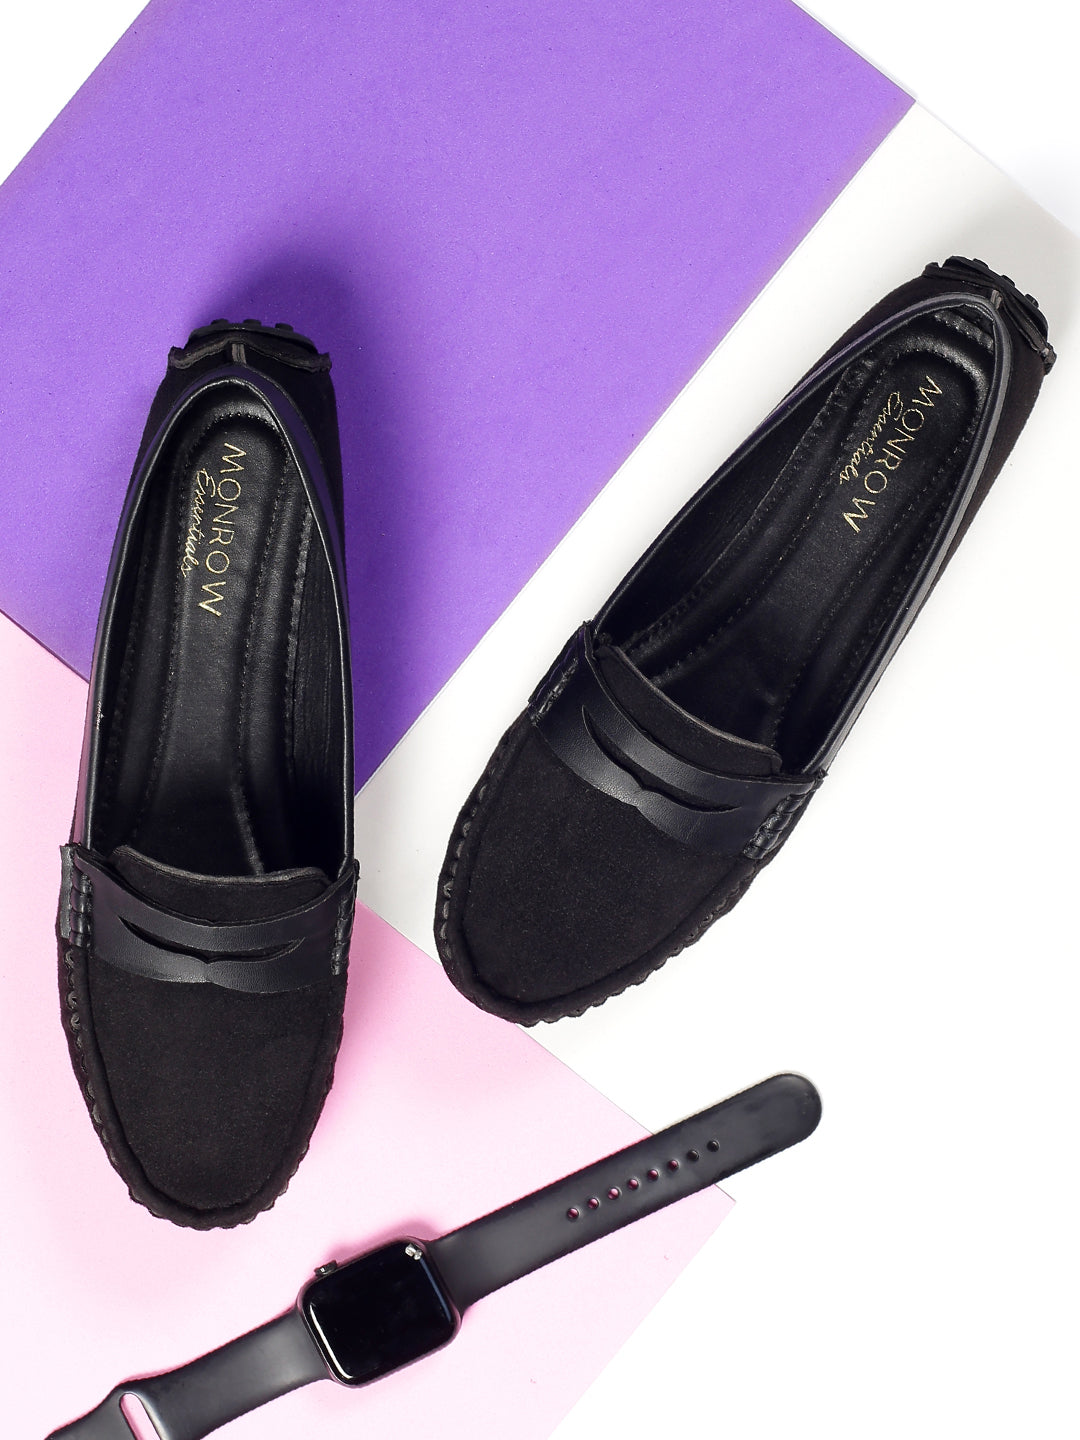 Manon Black Loafers